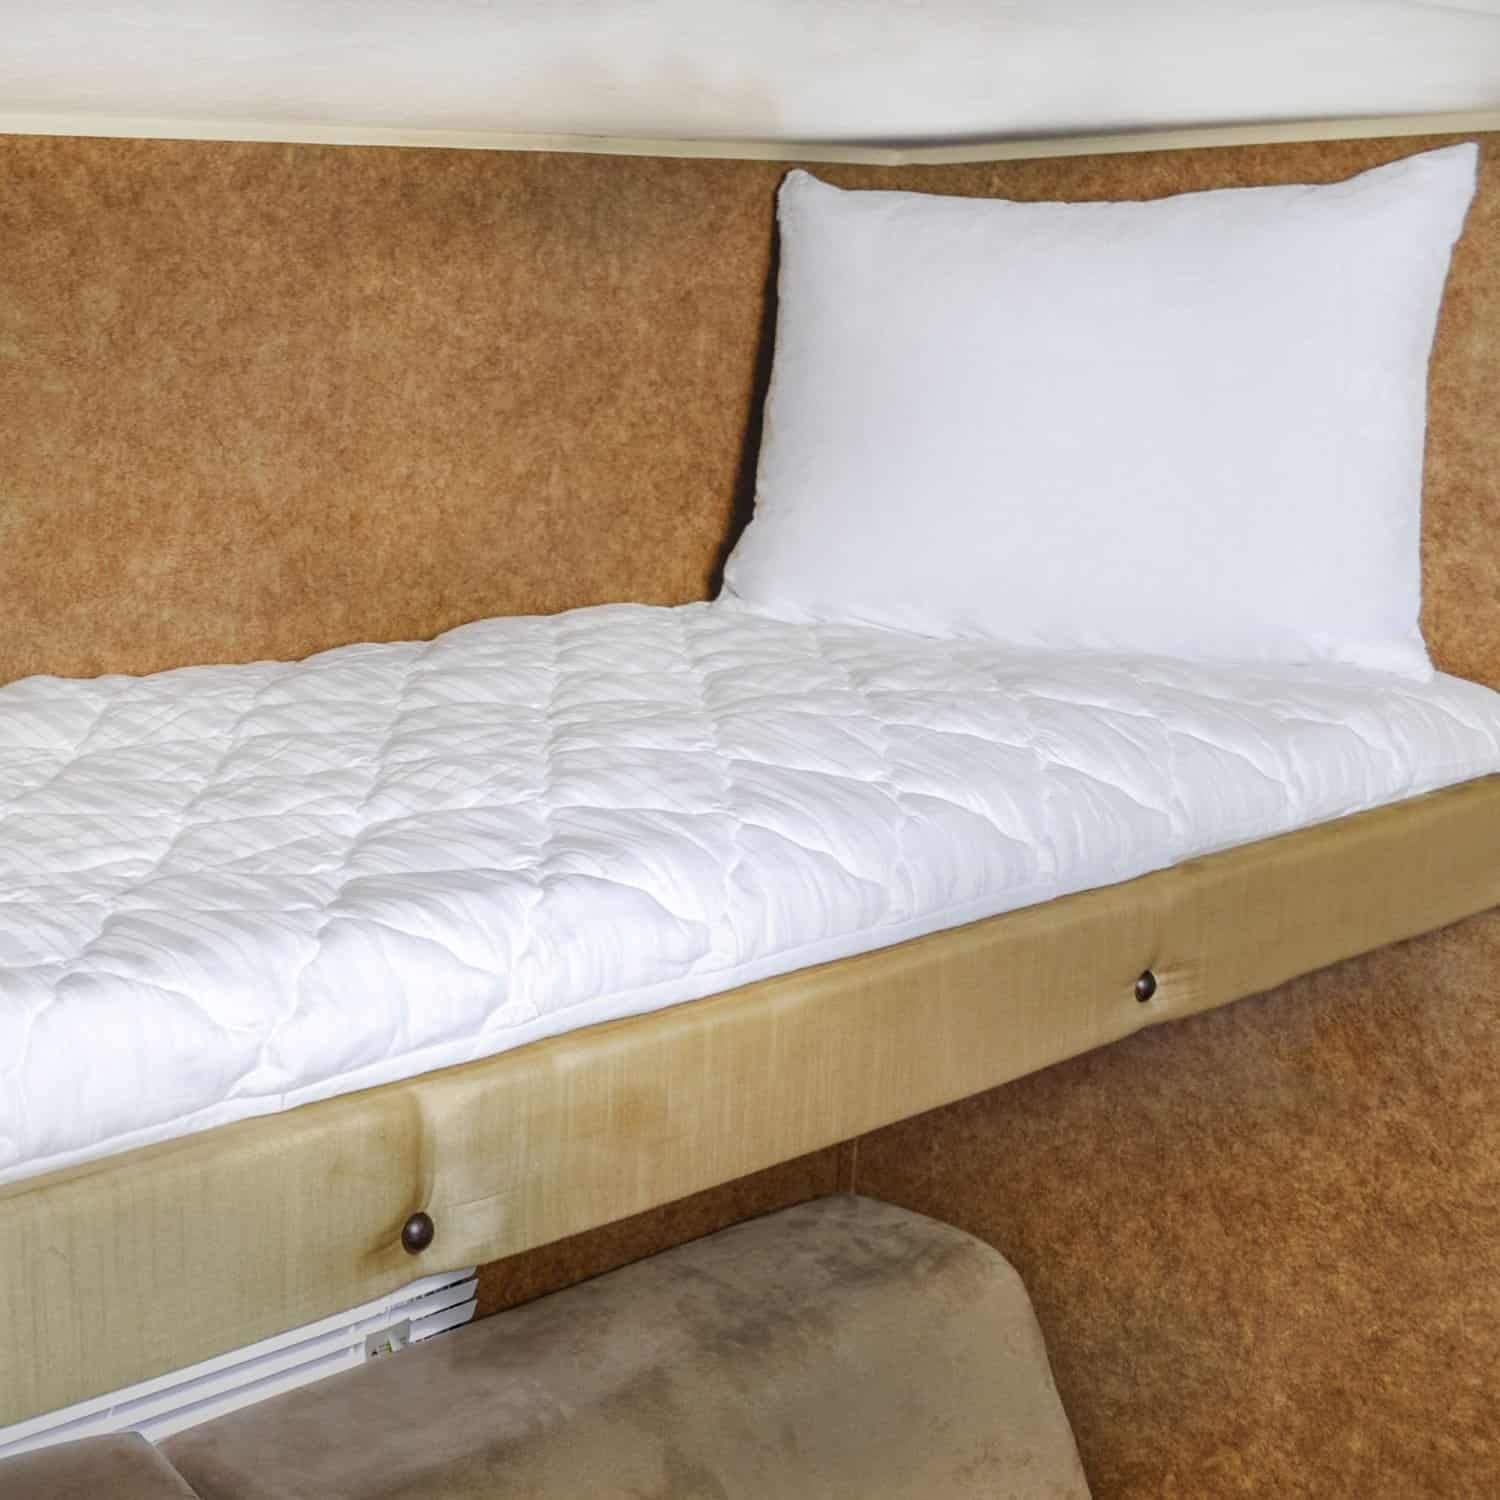 Rv Mattress Sizes Types And Places To Buy Them The Sleep Judge